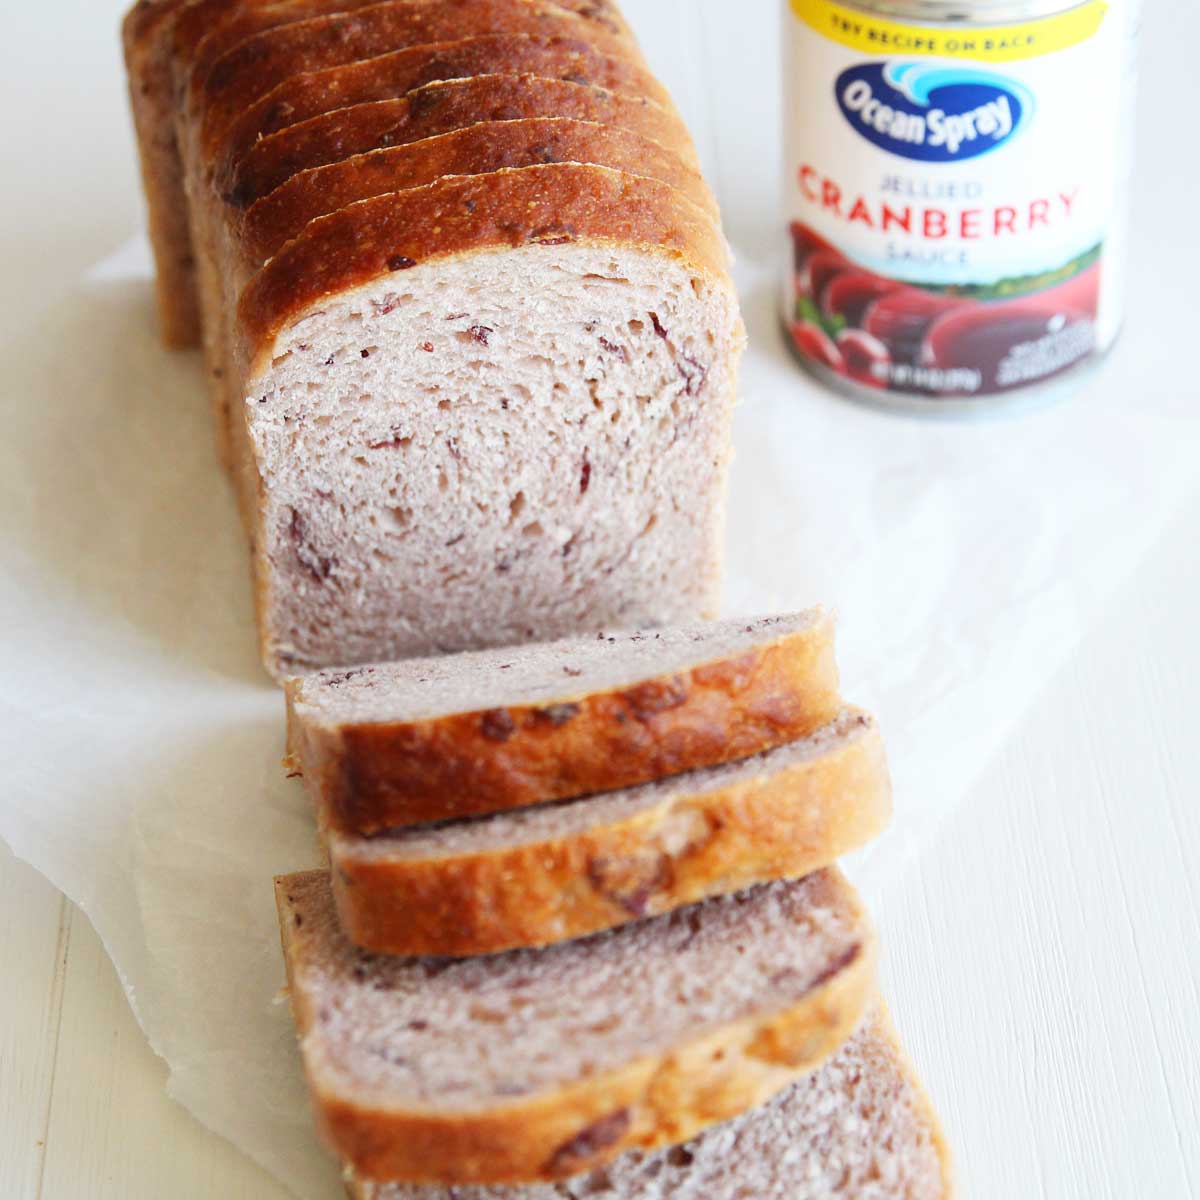 Cranberry Yeast Bread Loaf (An Easy, Vegan Recipe w/ Canned Cranberry Sauce) - mugwort songpyeon